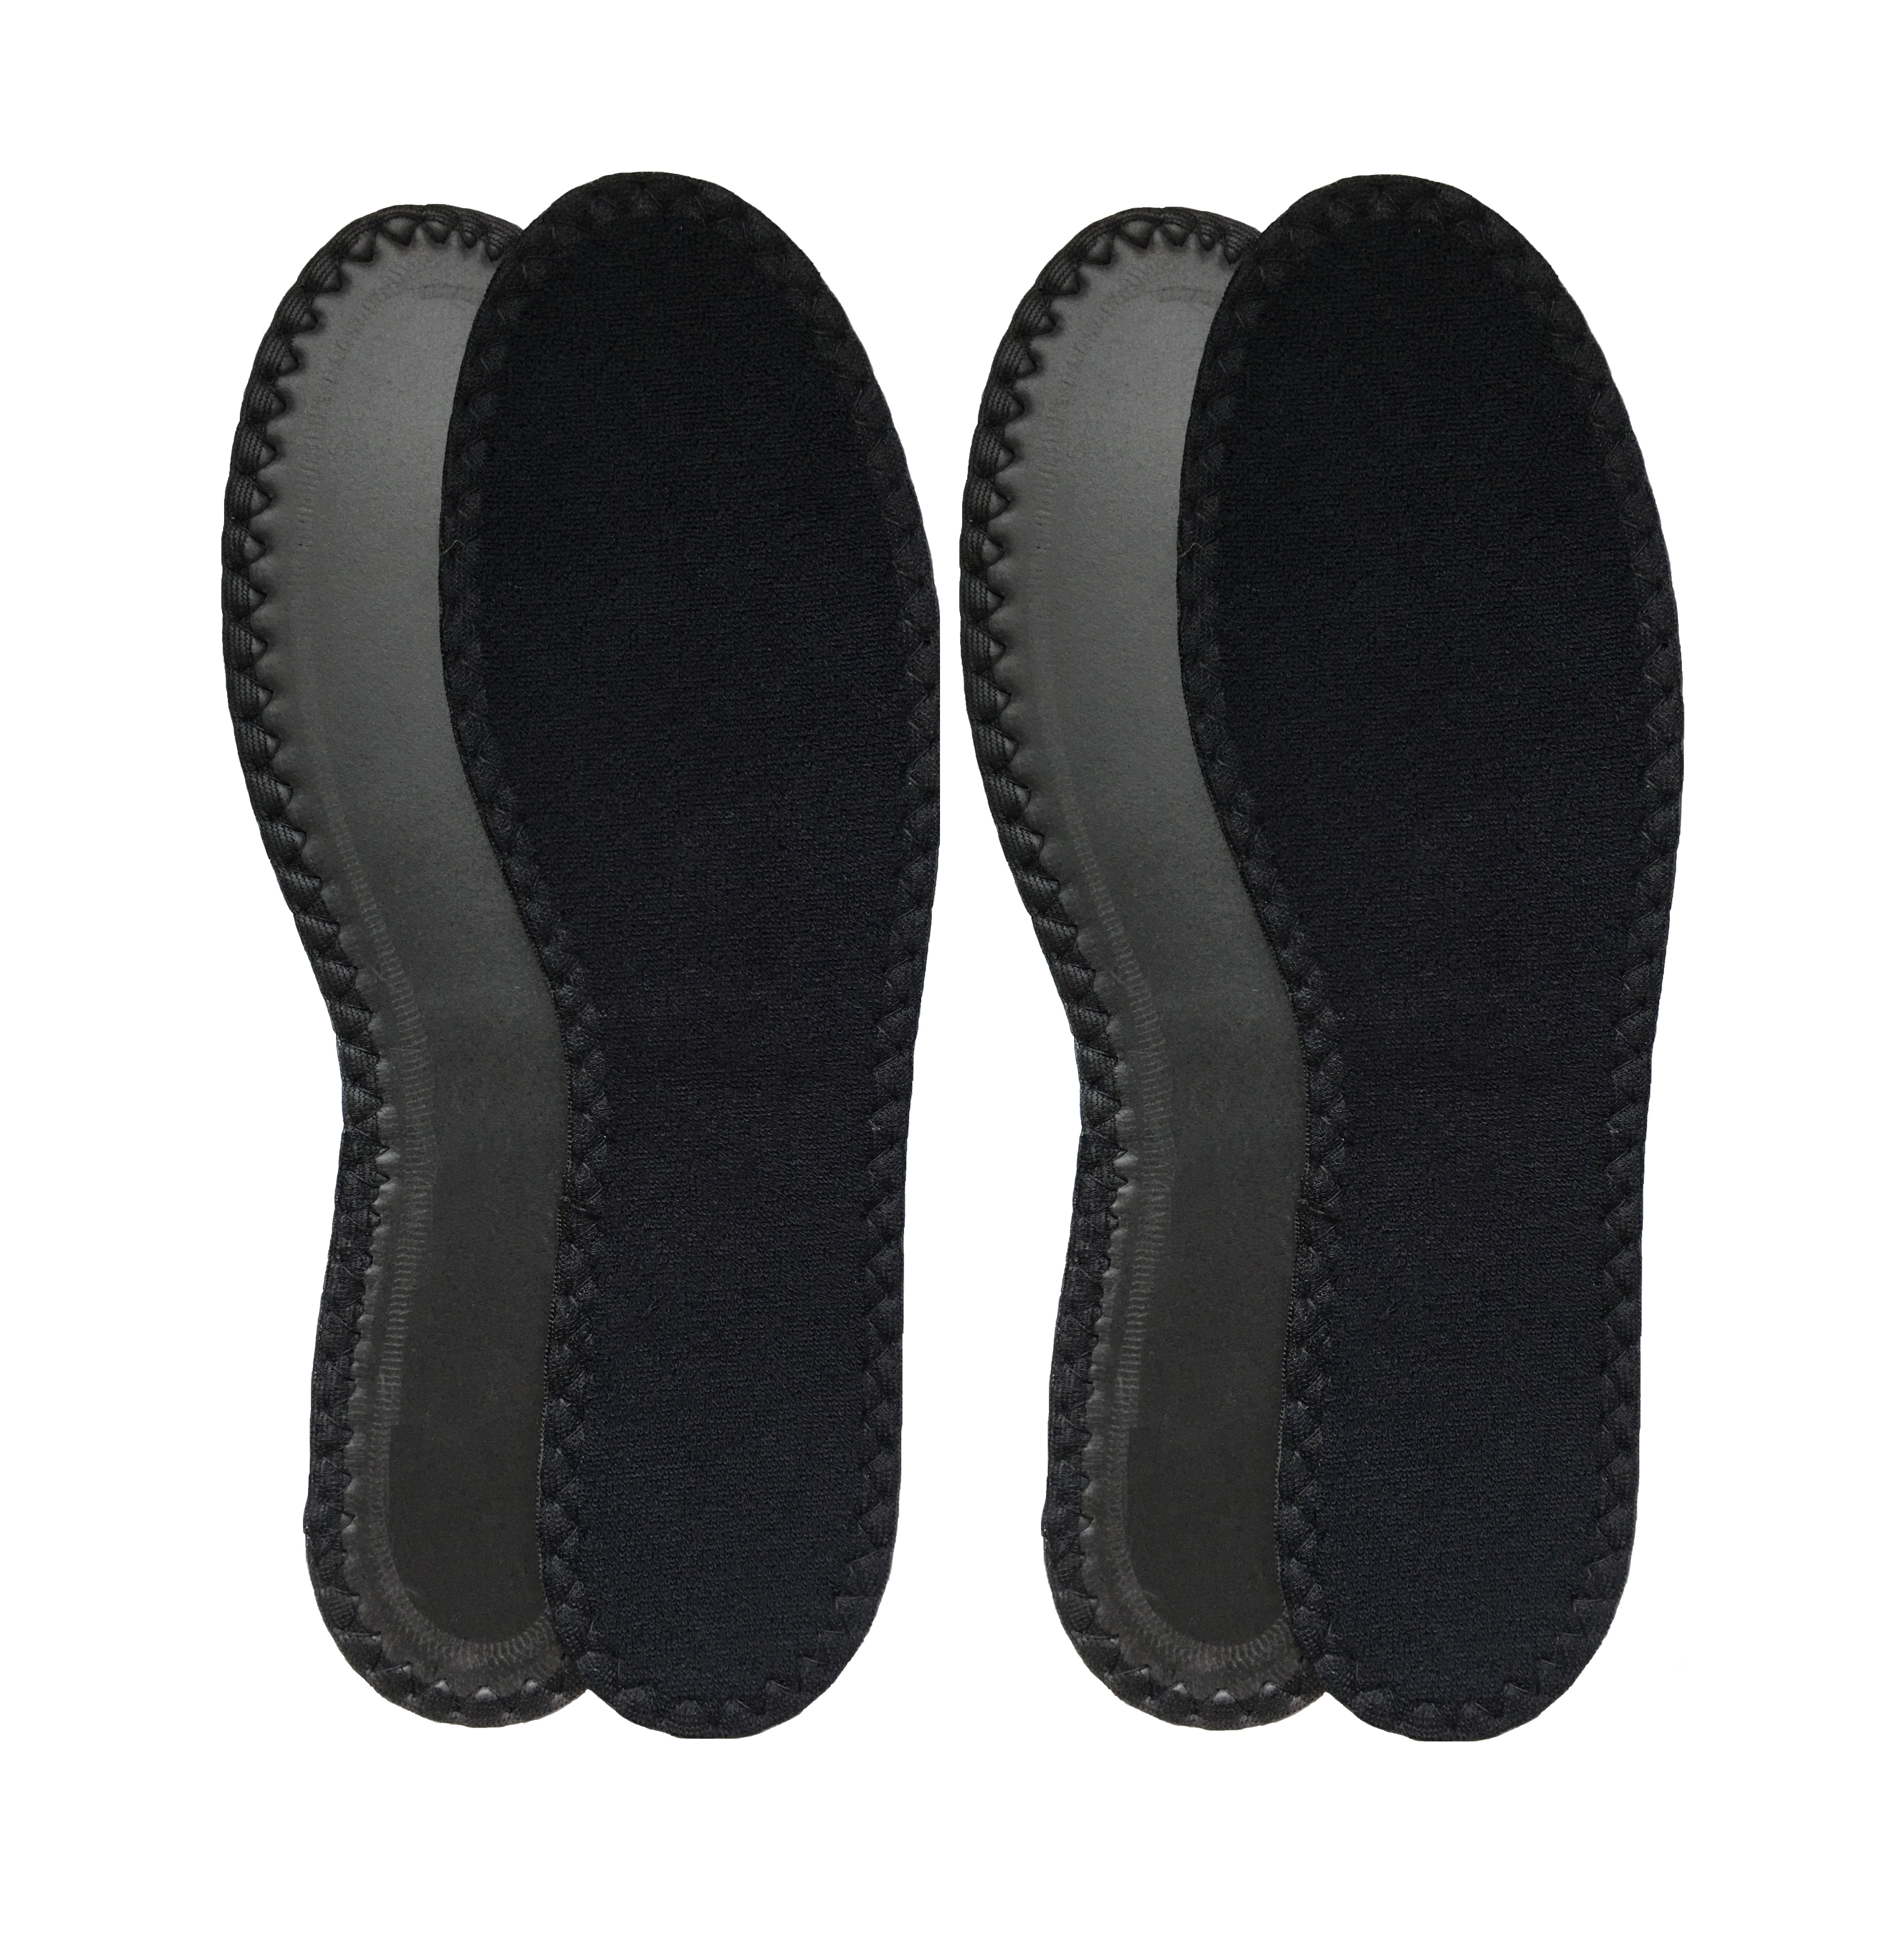 Cotton Terry Barefoot Insoles for Sockless Shoes （1 pair black & 1 pair white） 